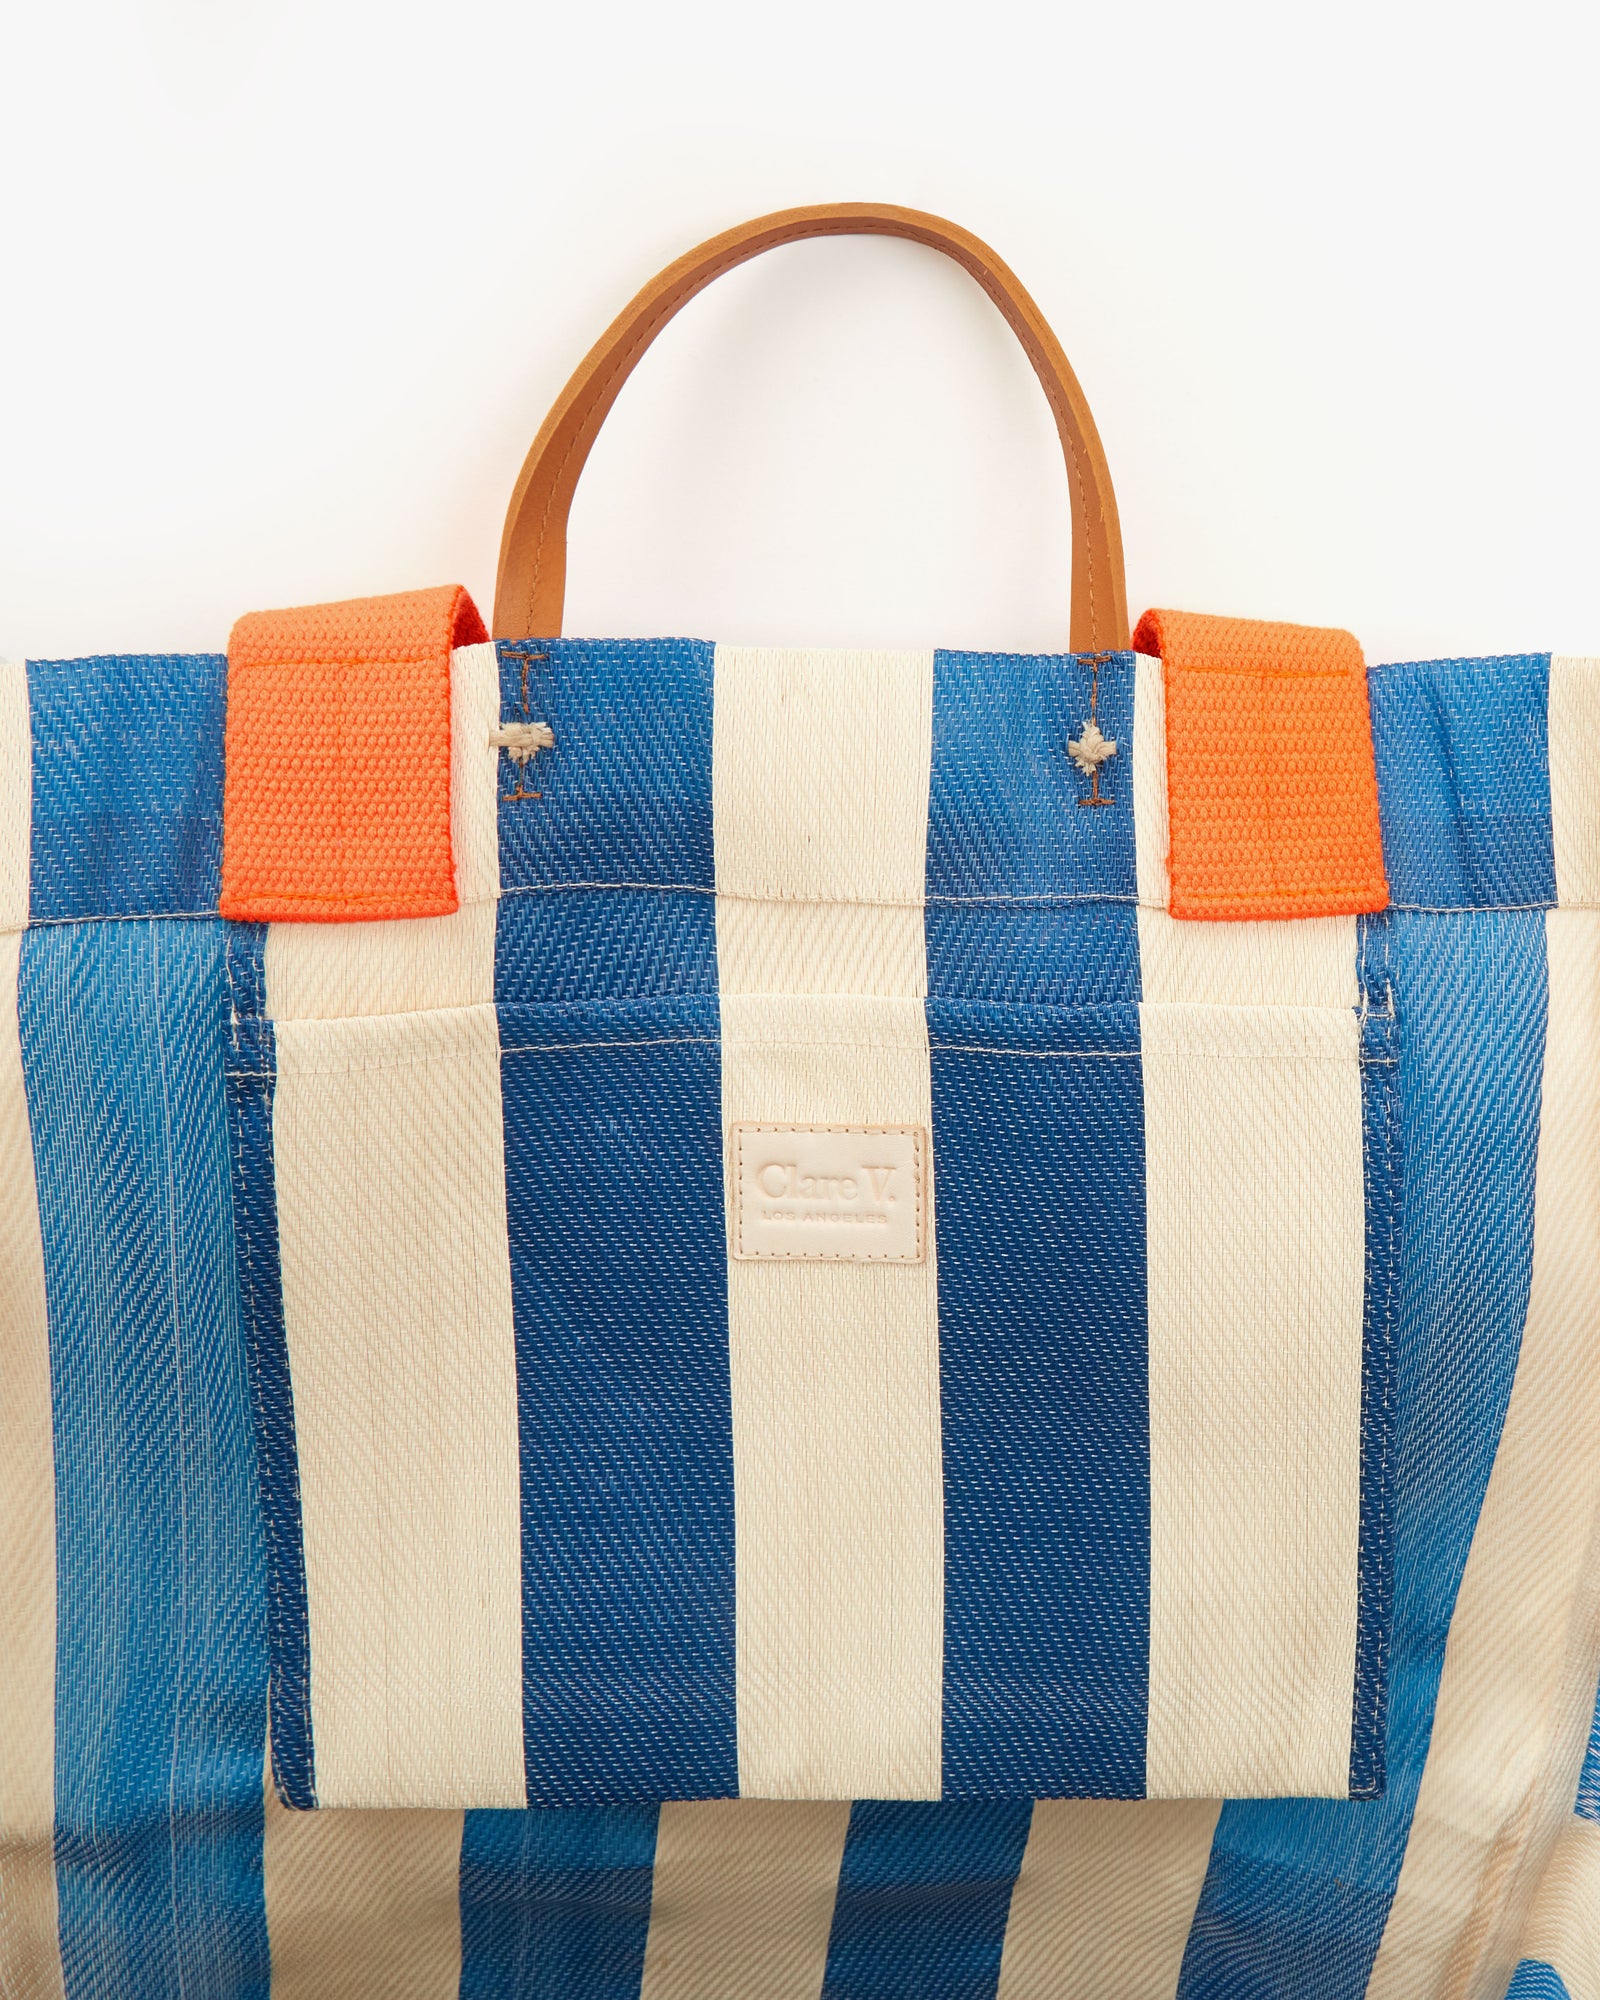 Clare V. Woven Tote Bags